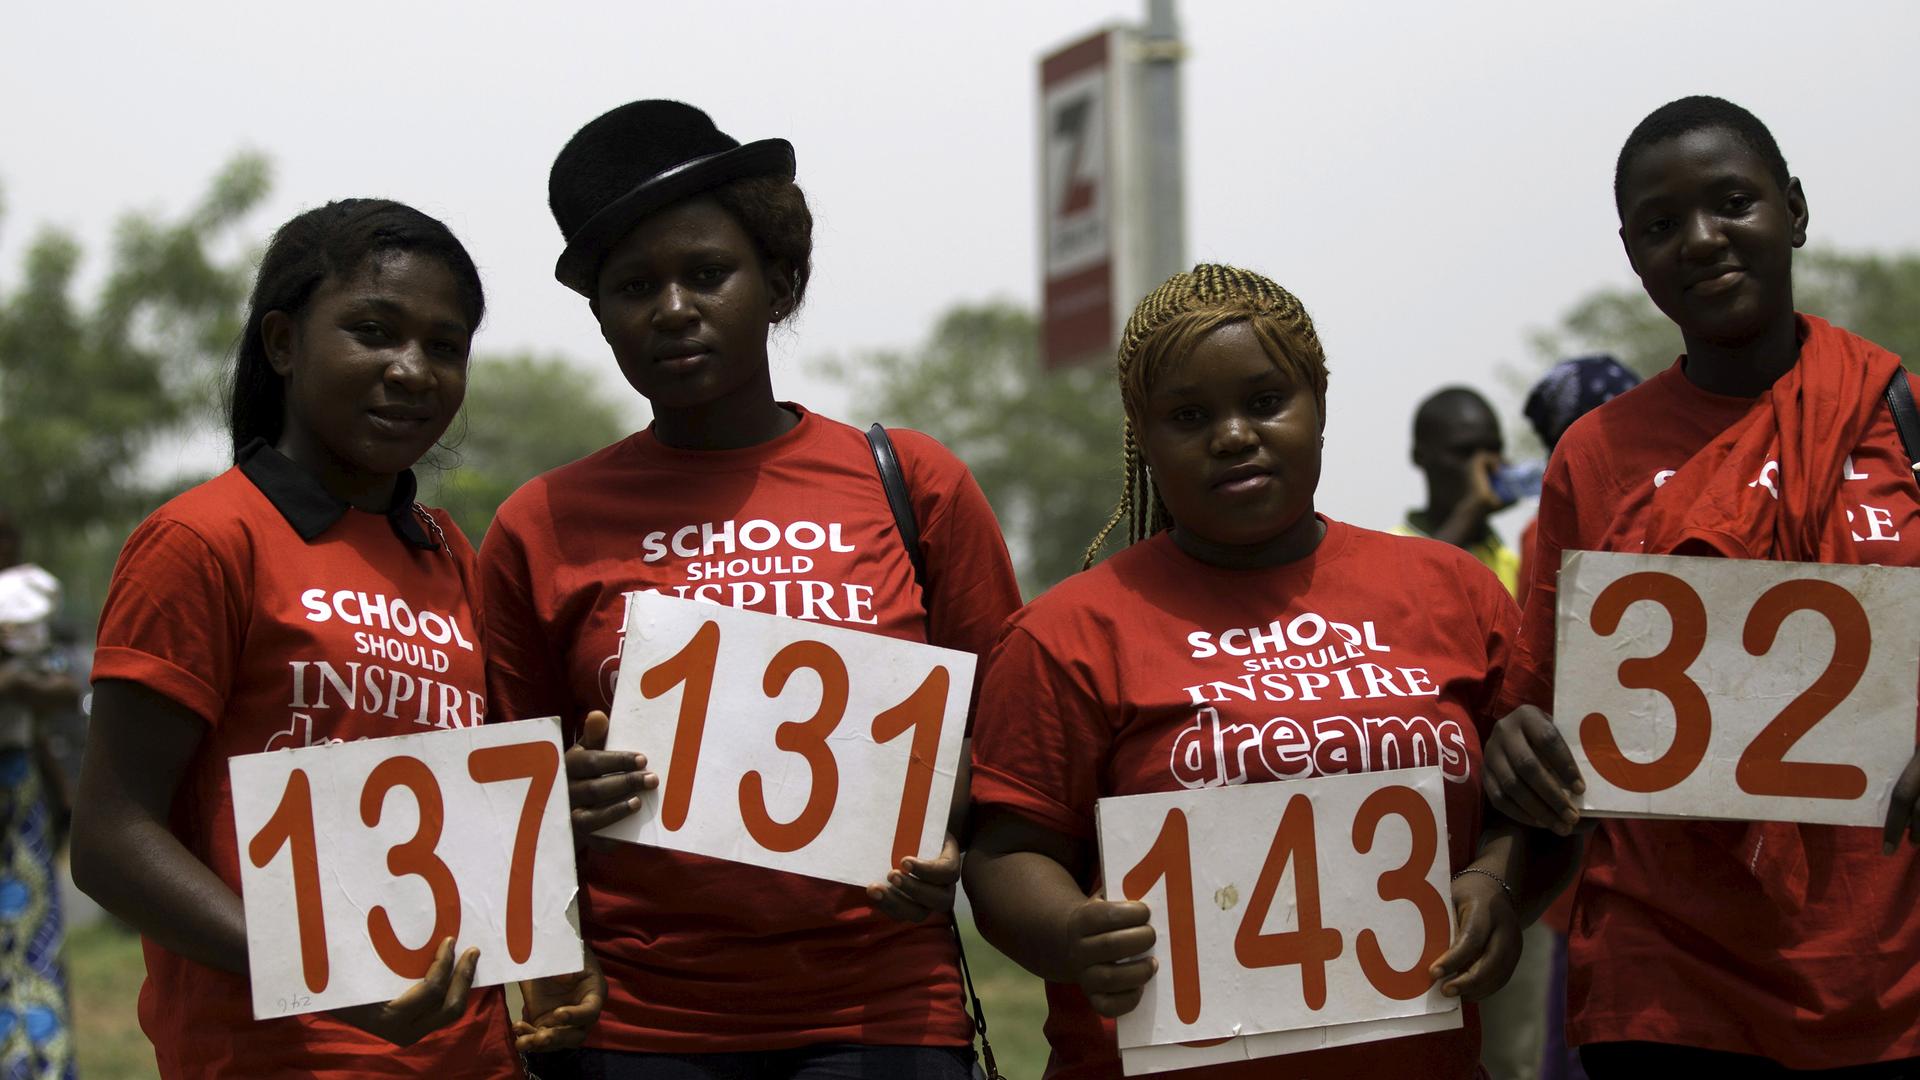 Students pose with placards as they join a march to mark the one-year anniversary of the mass kidnapping of more than 200 schoolgirls from a secondary school in Chibok by Boko Haram militants, in Abuja April 14, 2015.